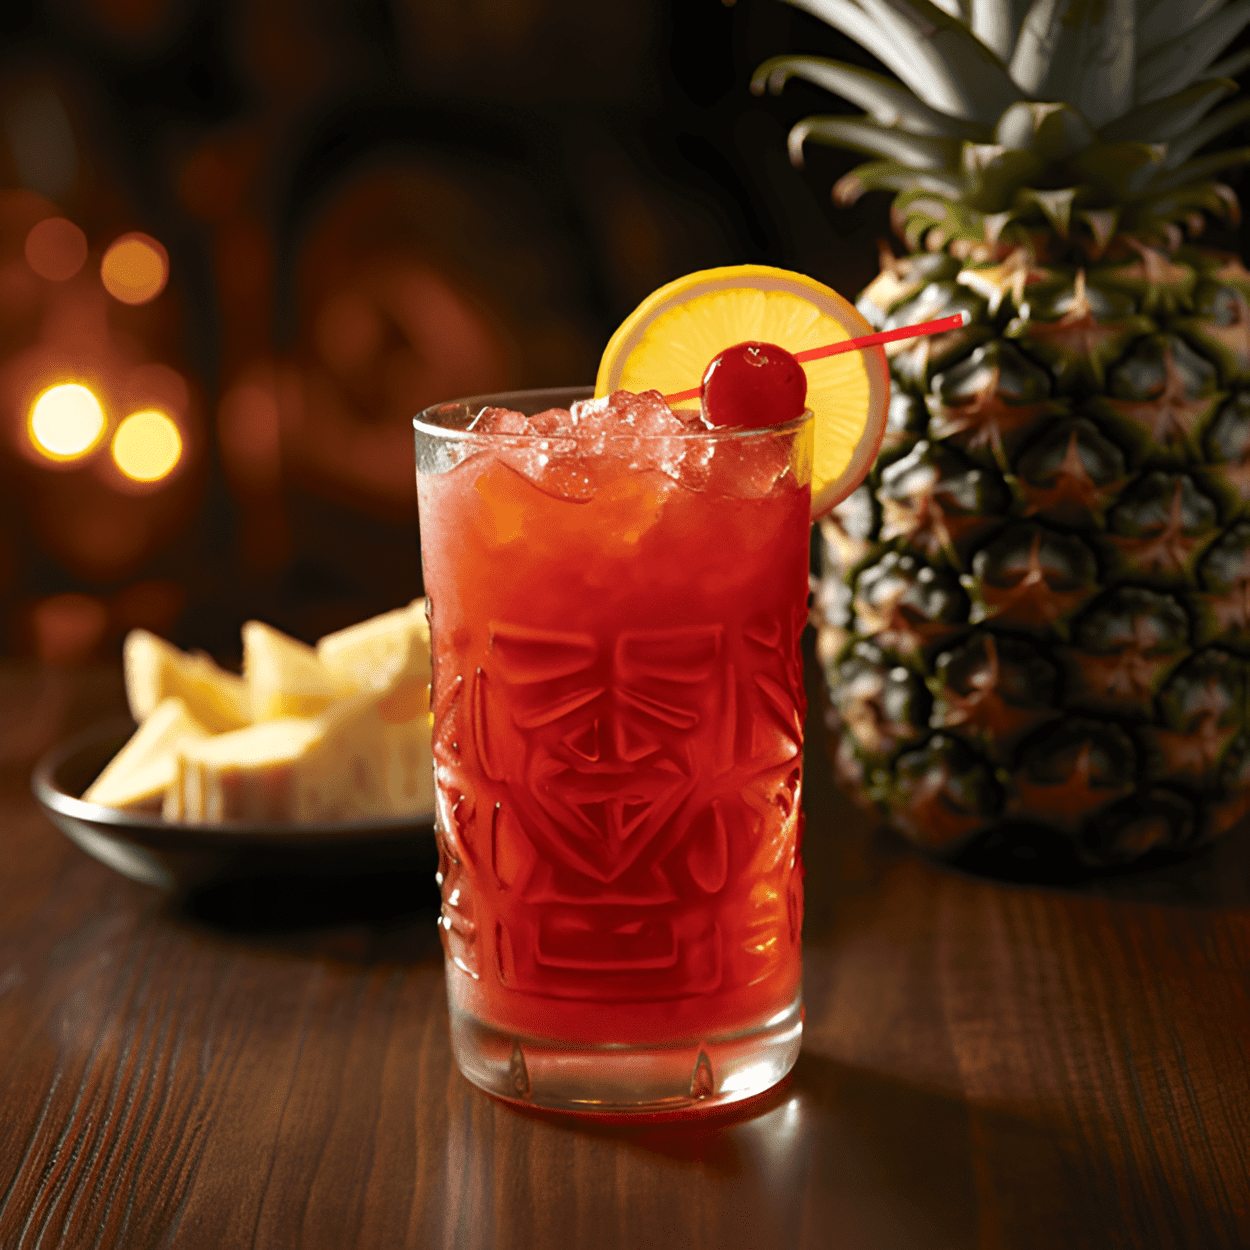 Firewalker Cocktail Recipe - The Firewalker cocktail is a tantalizing blend of sweet, sour, and spicy. The rum gives it a strong, robust flavor, while the pineapple juice and grenadine add a sweet and fruity touch. The Tabasco sauce gives it a fiery kick that is sure to wake up your taste buds.